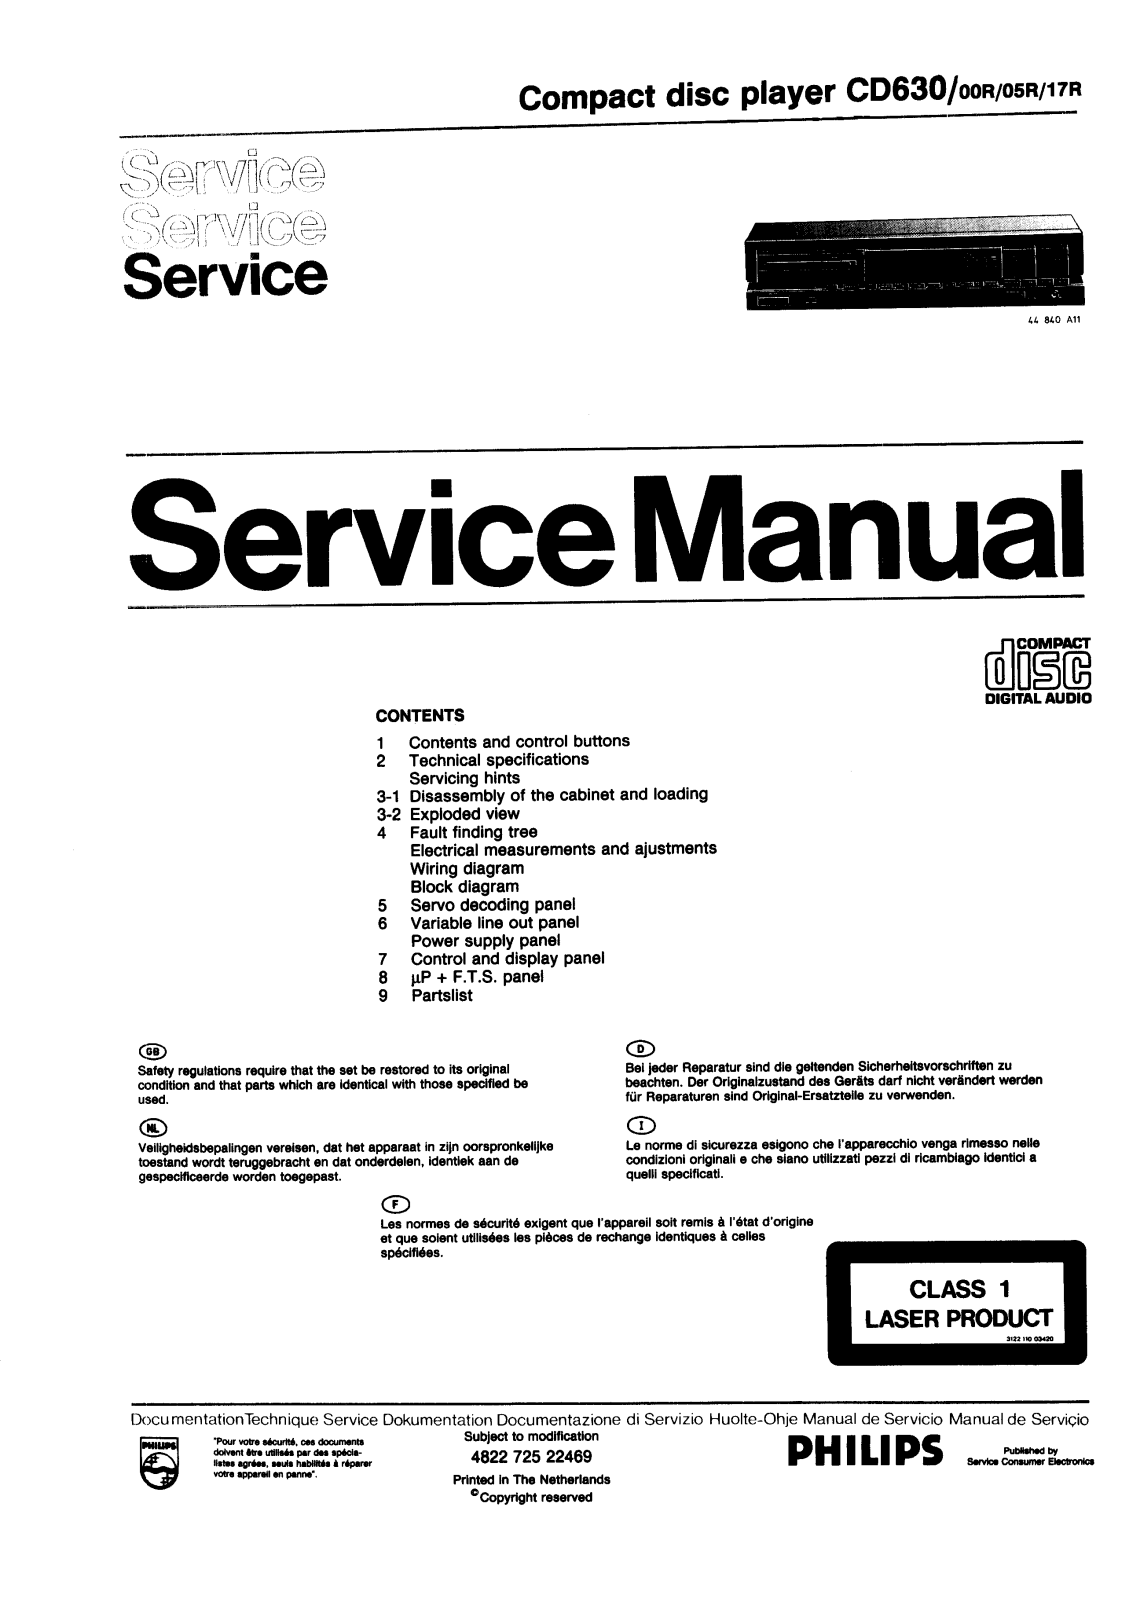 Philips CD-630 Owners manual